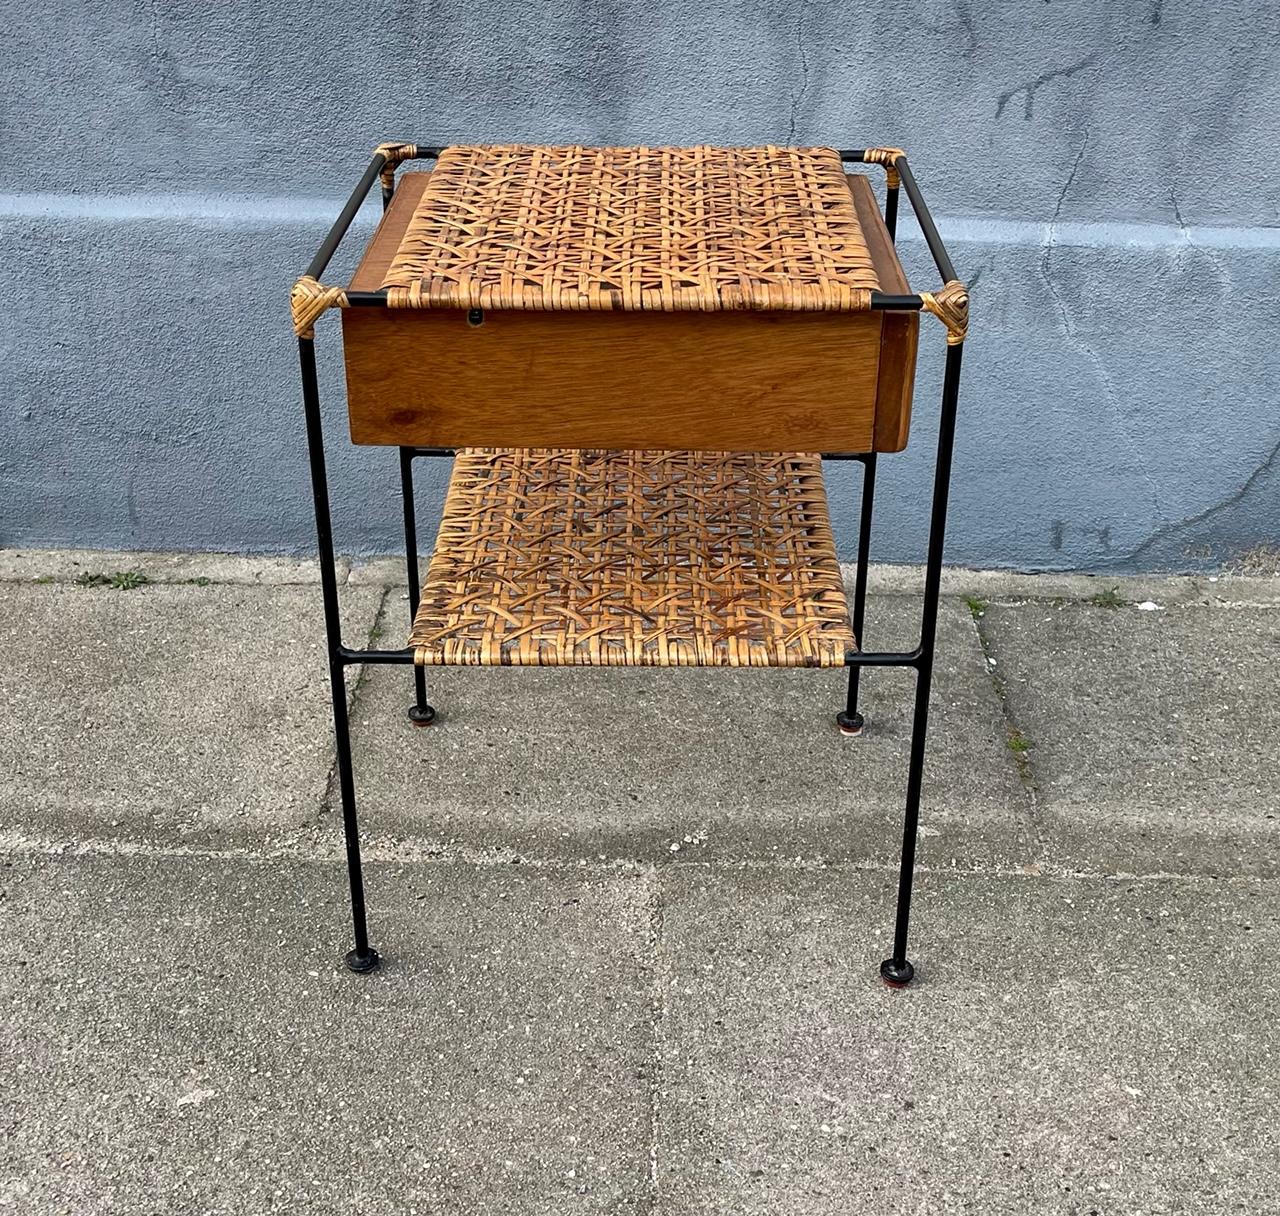 Mid-20th Century Vintage Italian Shaker or Side Table in Steel, Rattan and Rattan